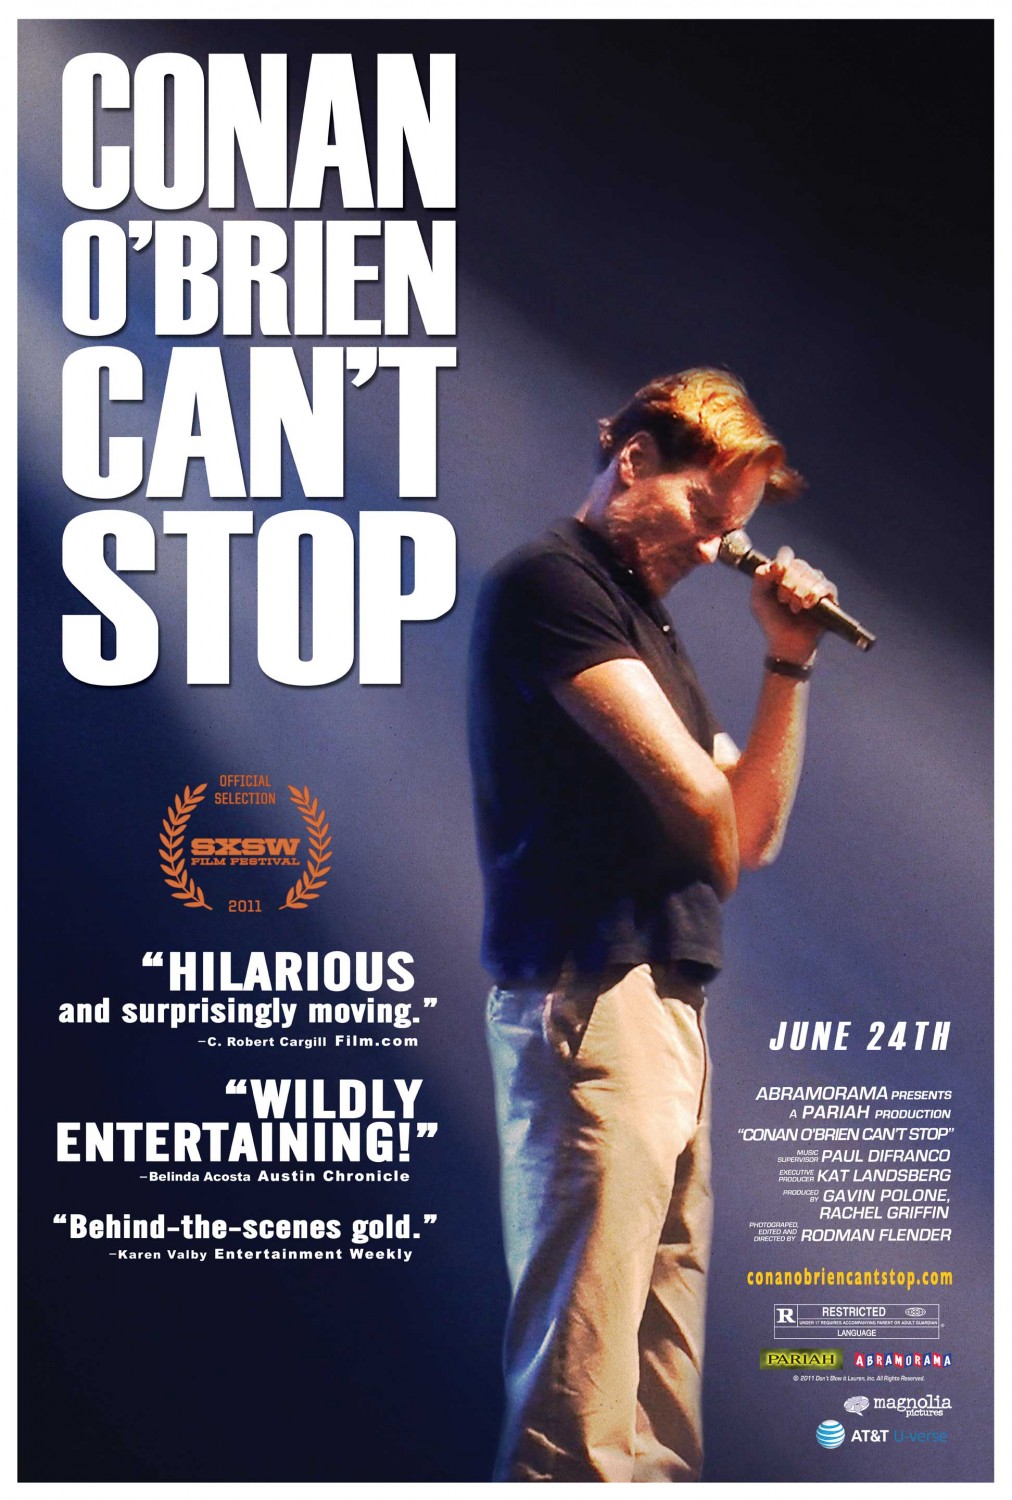 Extra Large Movie Poster Image for Conan O'Brien Can't Stop 